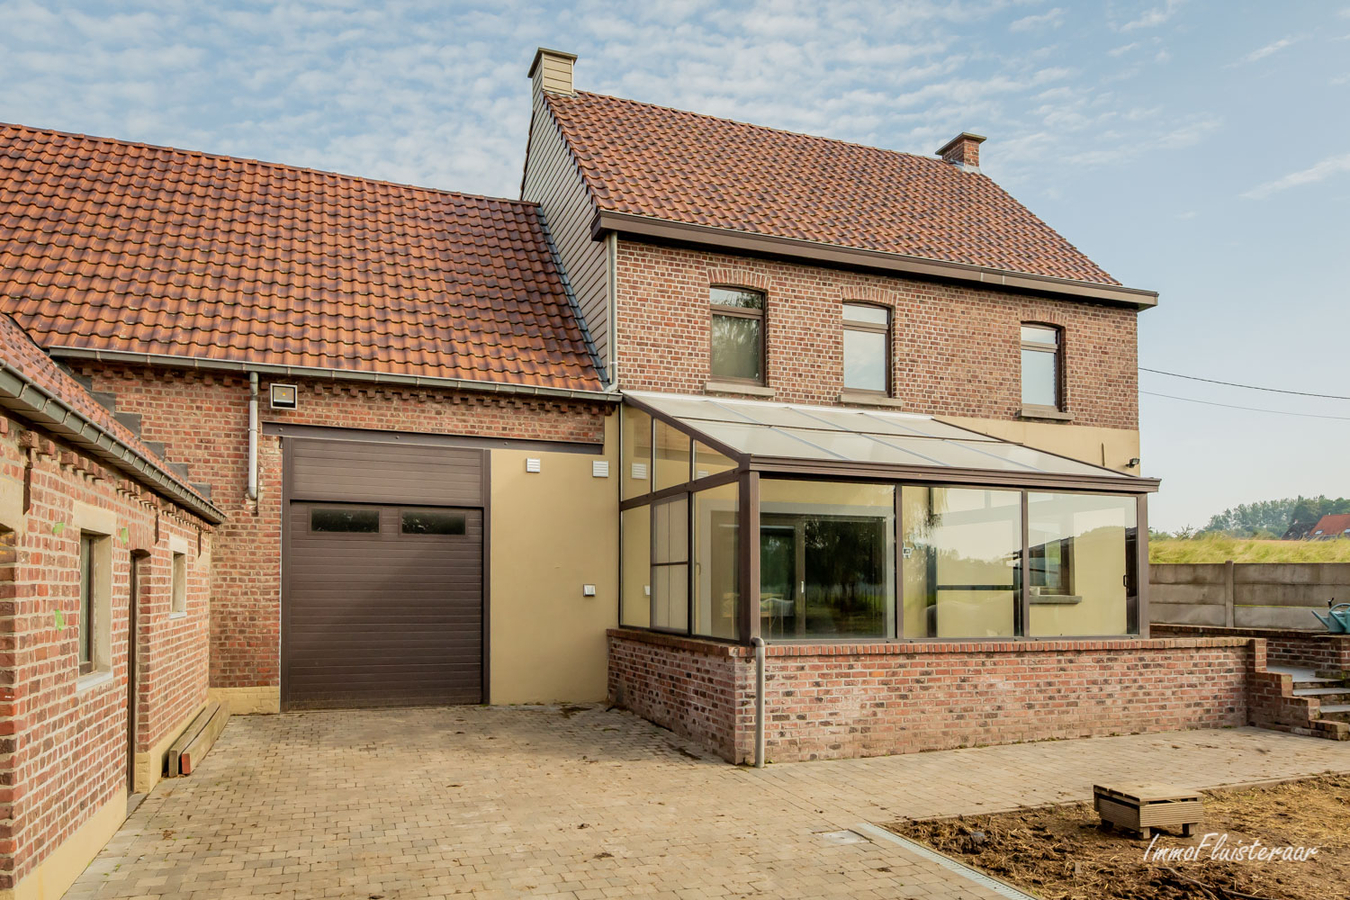 Property sold in Zwalm